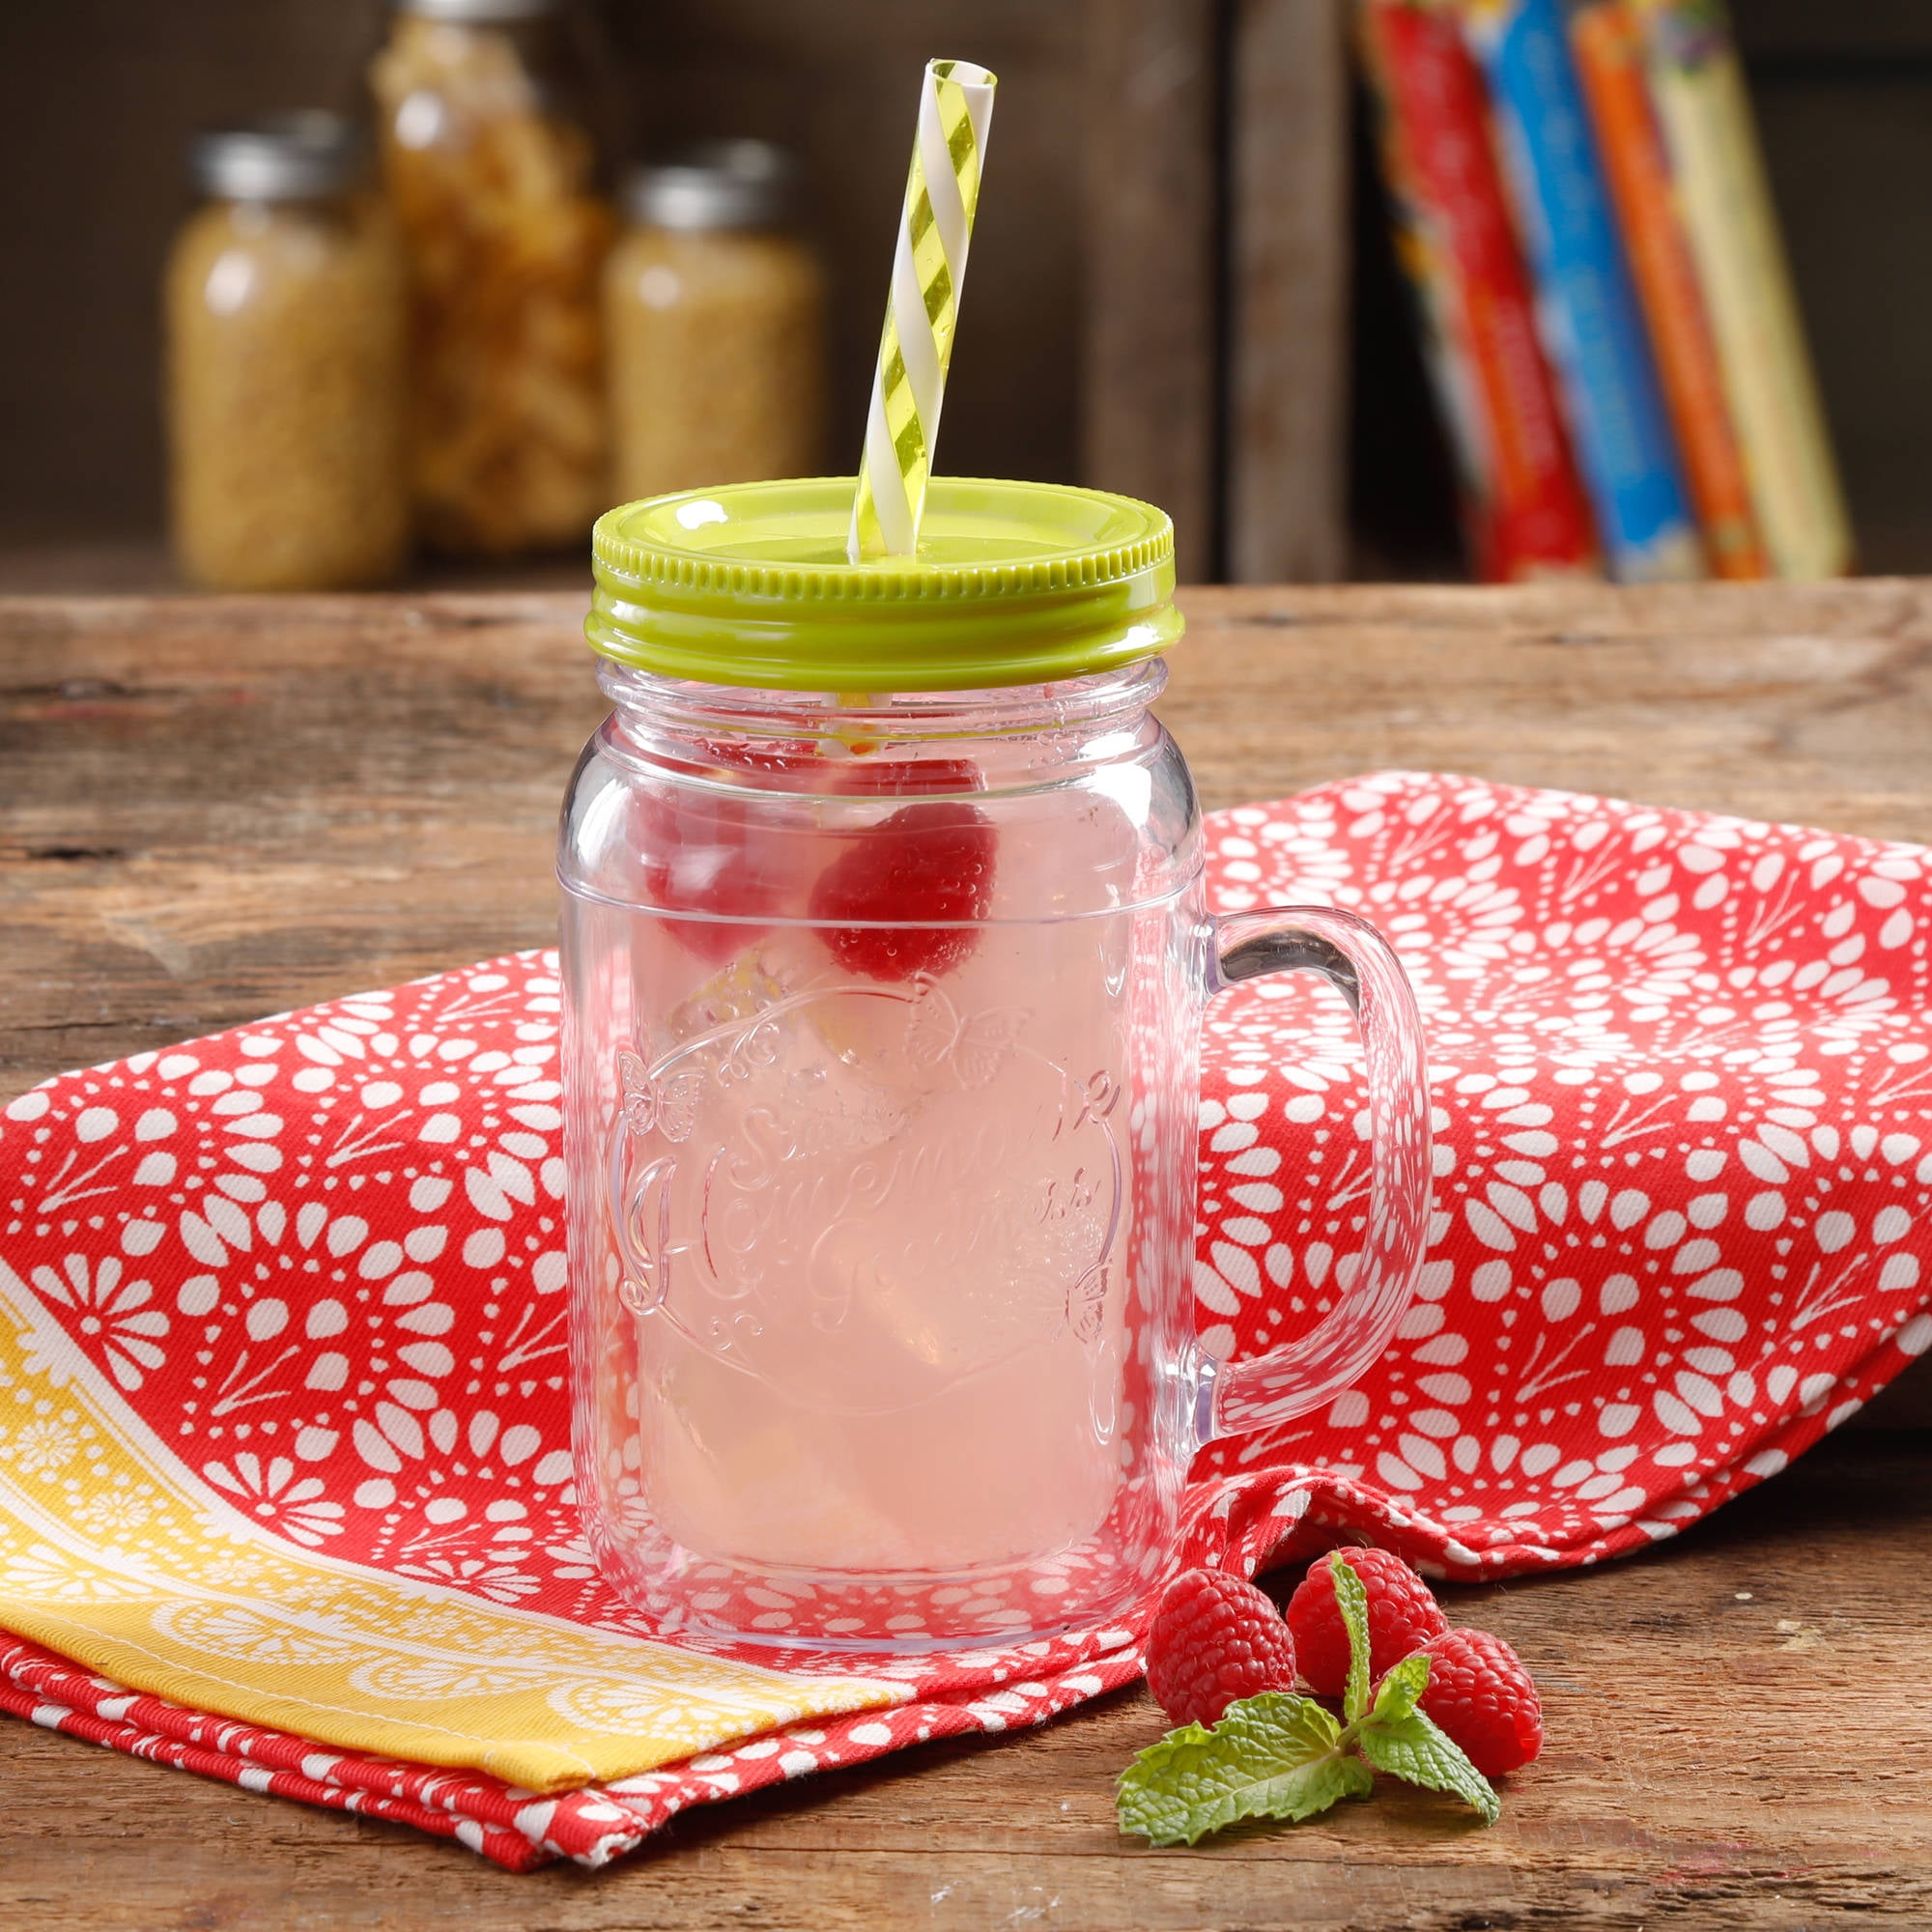 4-Pack The Pioneer Woman Simple Homemade Goodness 16-Ounce Mason Jar with Timeless Floral Lid and Straw